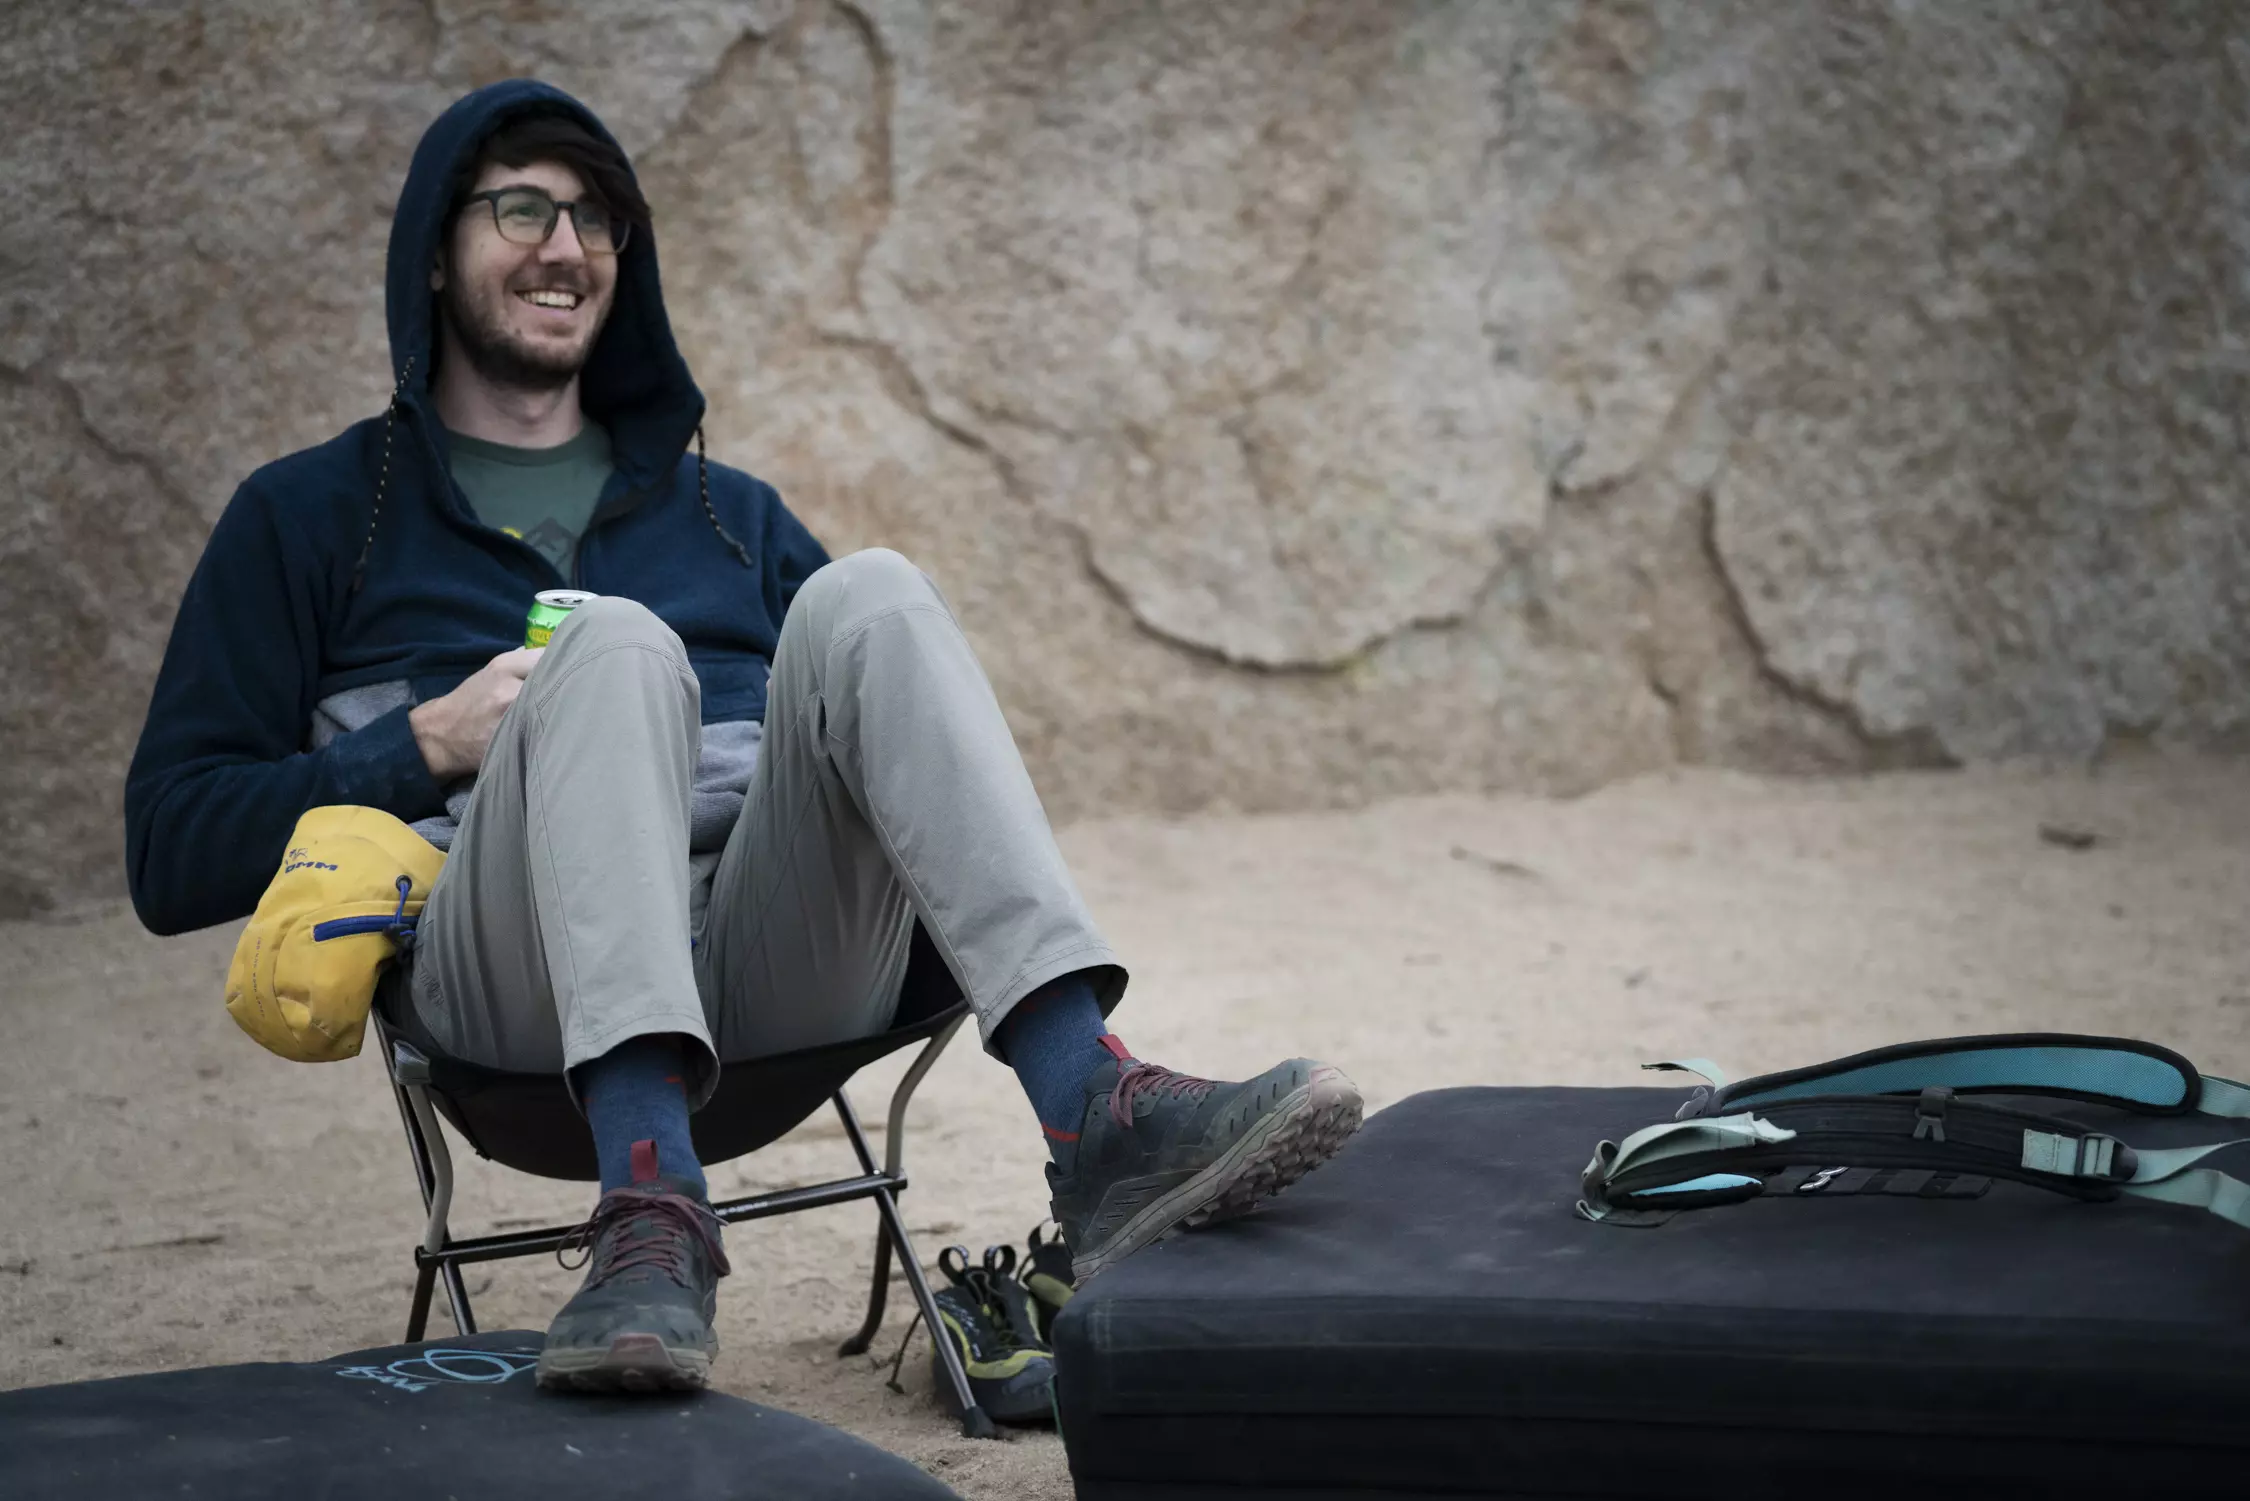 Backpacking chairs may not be as comfy as camp chairs, but they sure make life on a backpacking trip easier